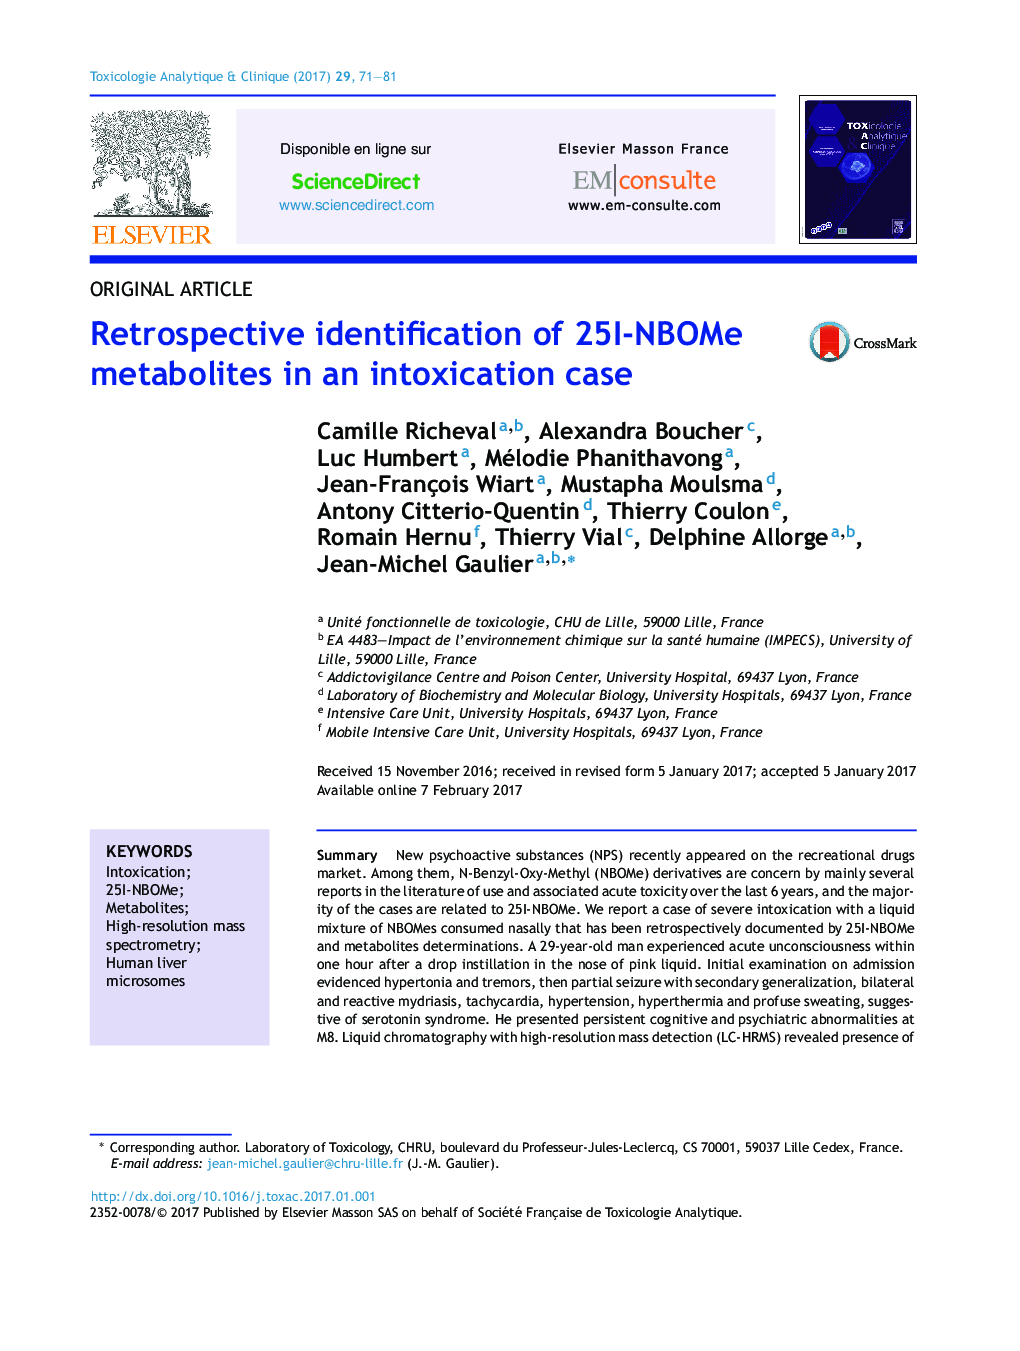 Retrospective identification of 25I-NBOMe metabolites in an intoxication case